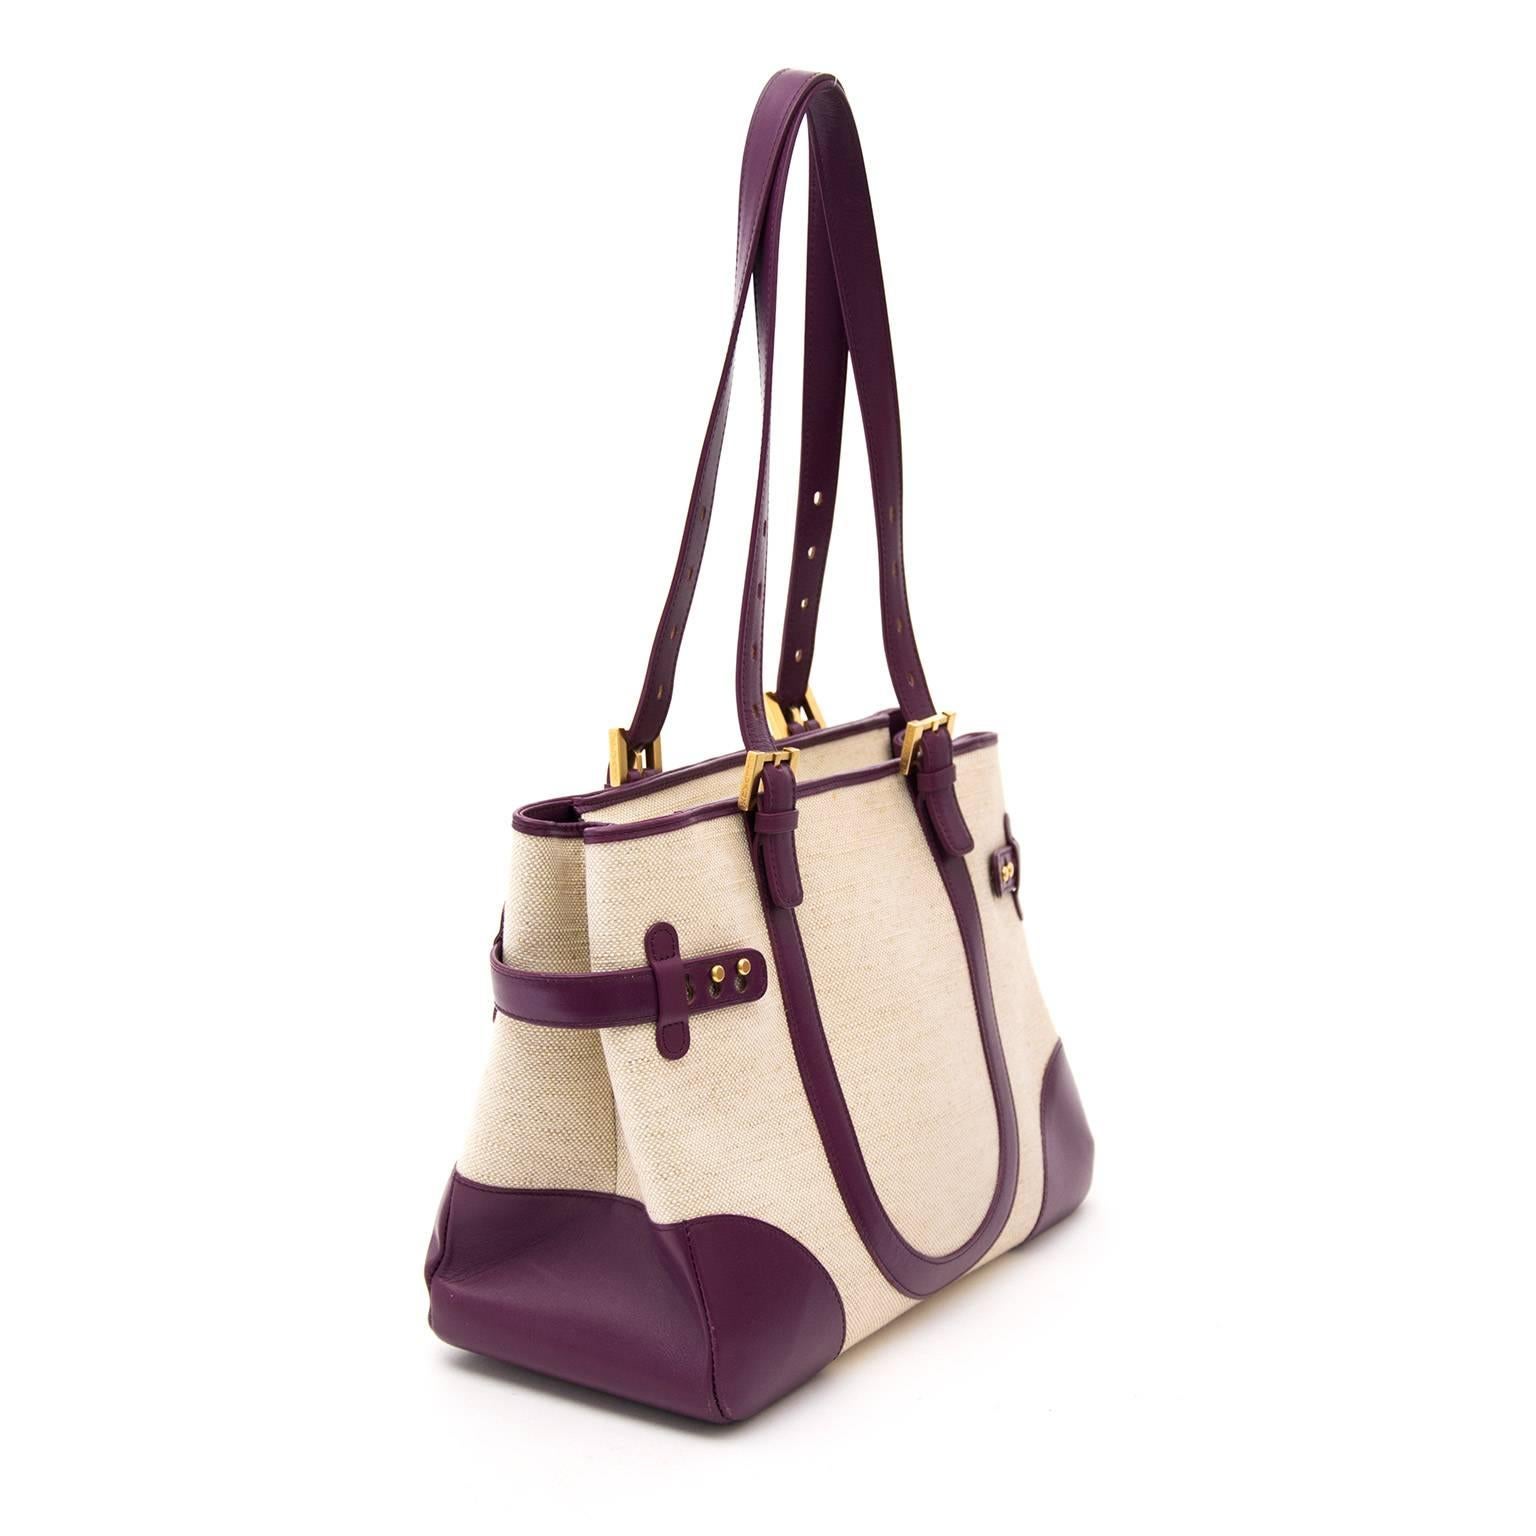 This unique Delvaux Tempête City comes in a light colored canvas with purple leather details and gold-tone hardware.  Shoulderstraps are adjustable which makes the bag easy to wear.  Closes with a topzipper.  Small pocket in the front.  Interior